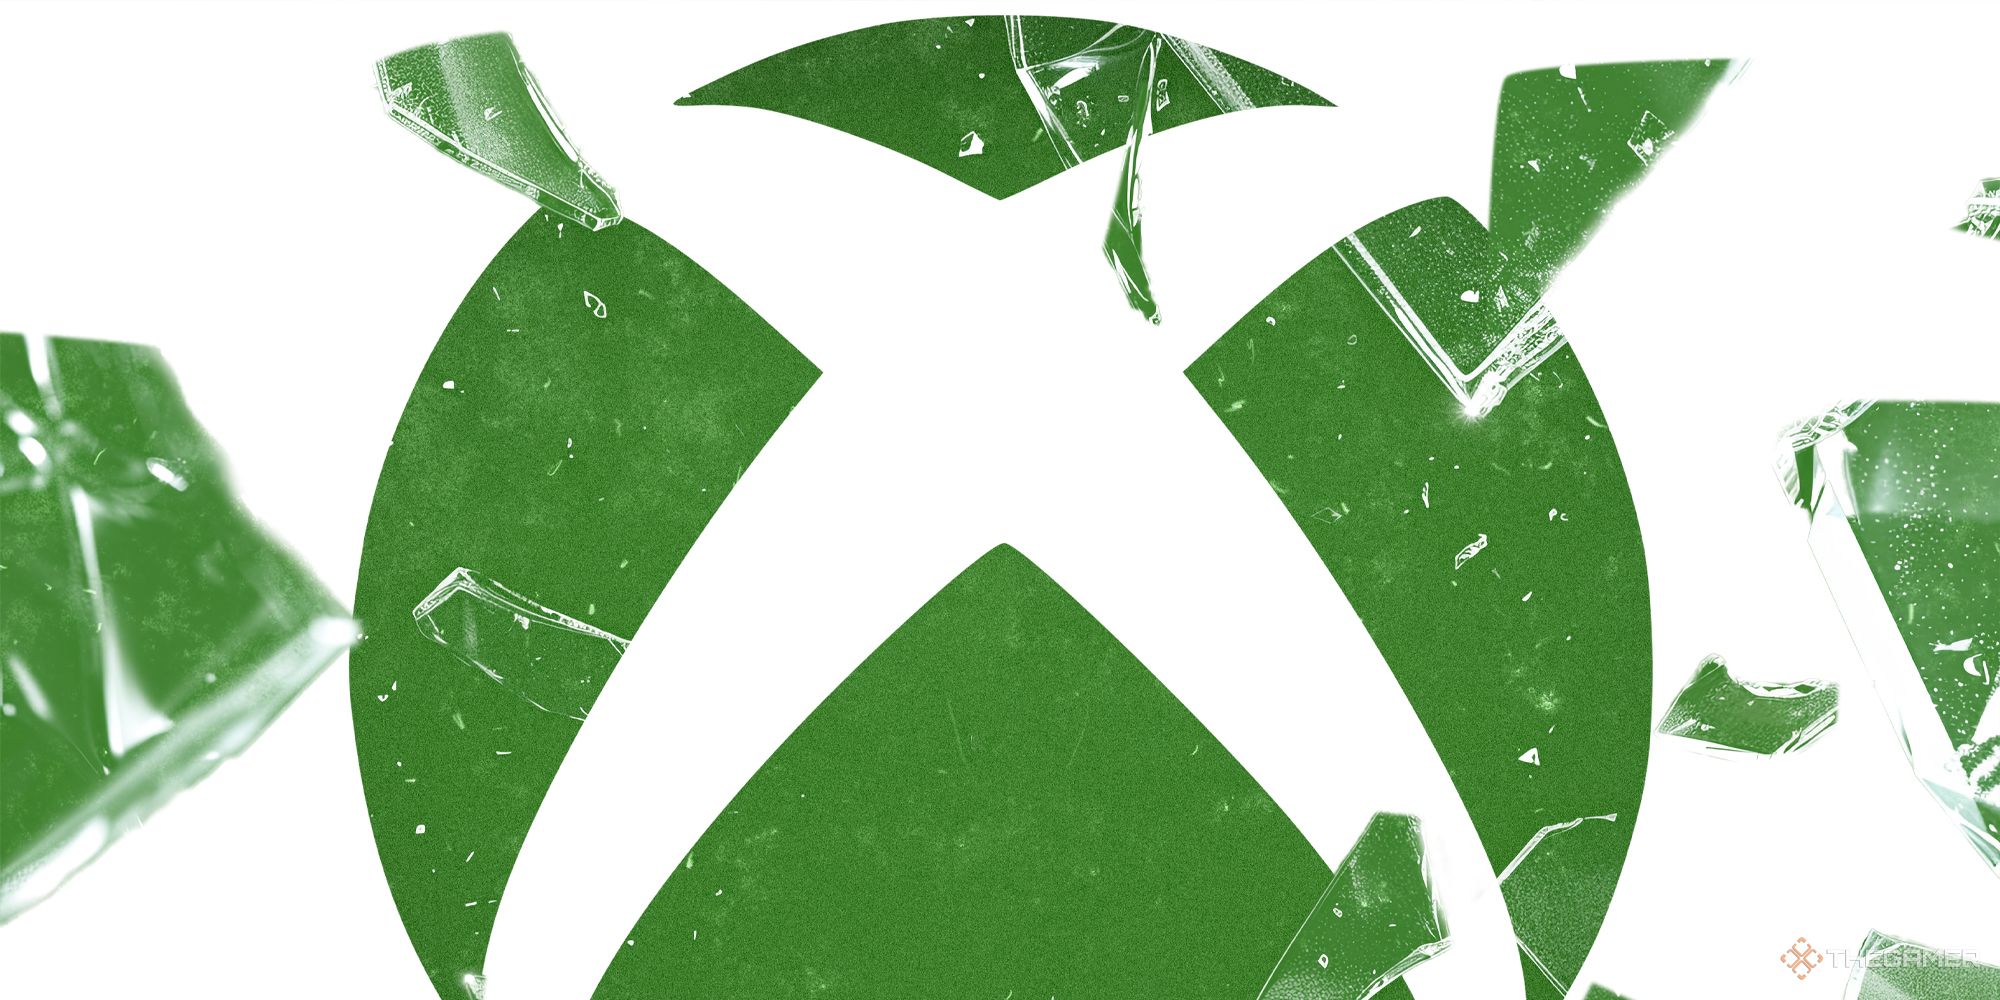 Xbox logo over a white background shattering